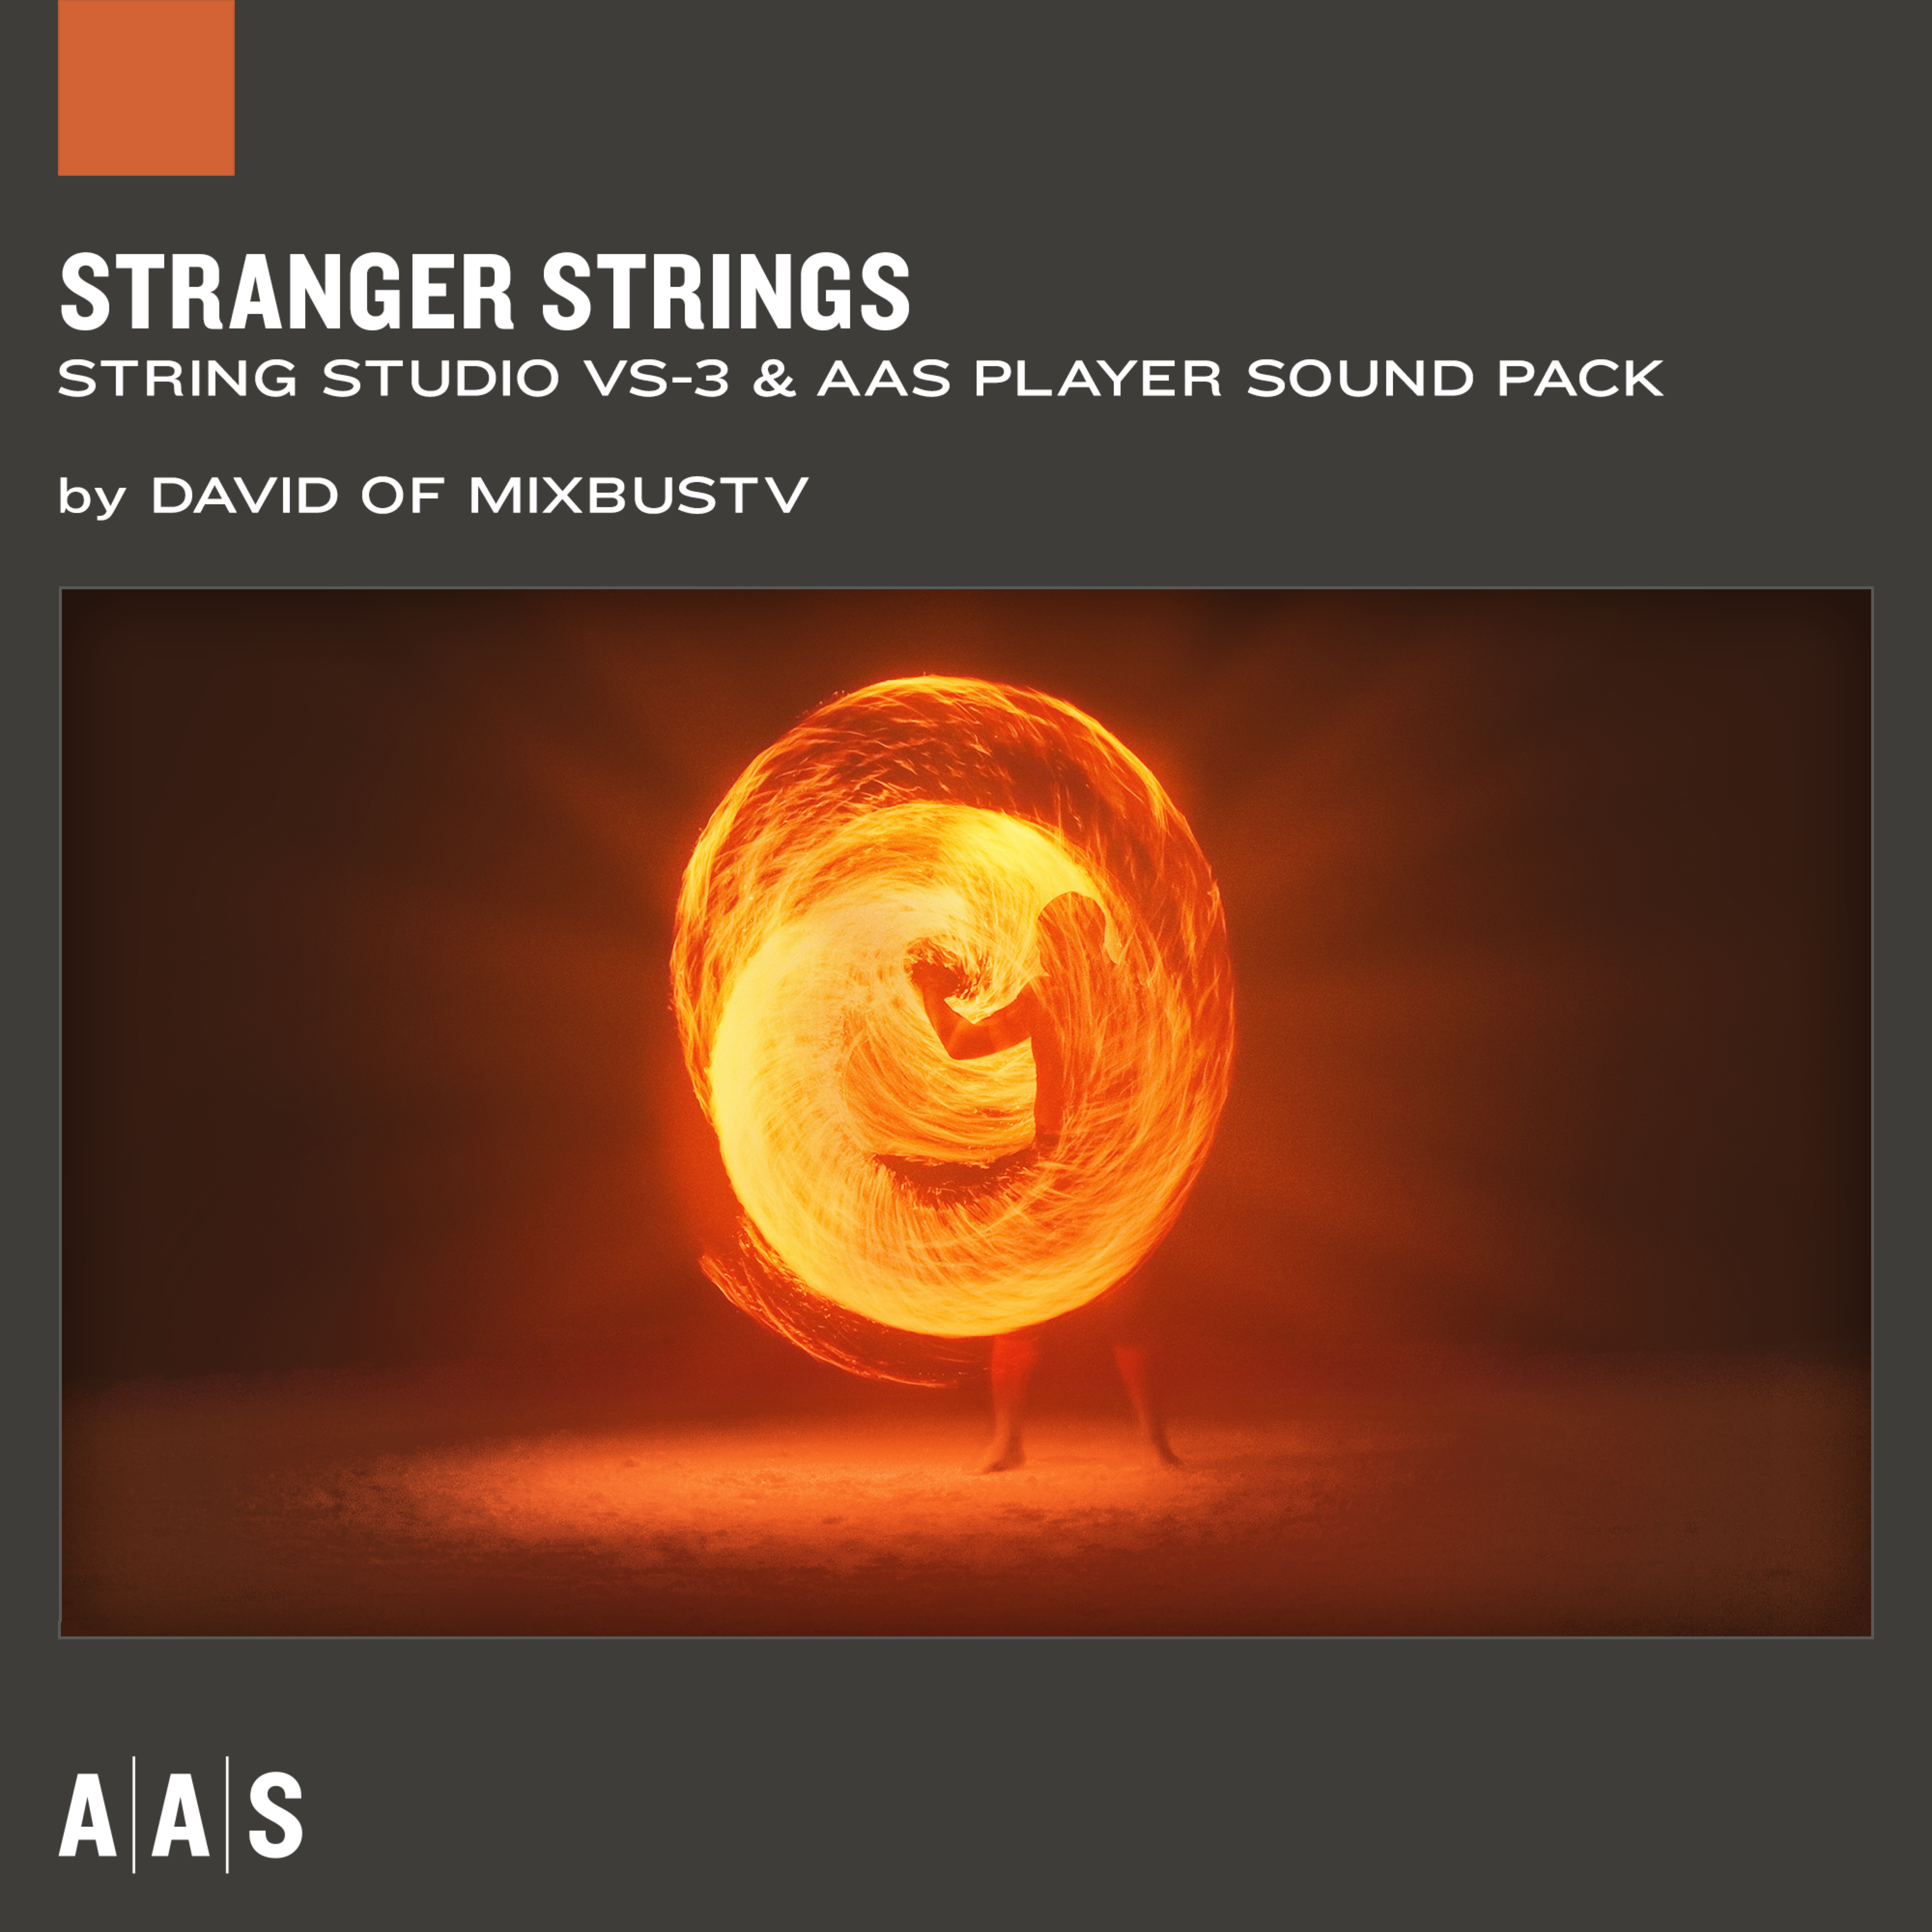 String Studio and AAS Player sound pack ： Stranger Strings